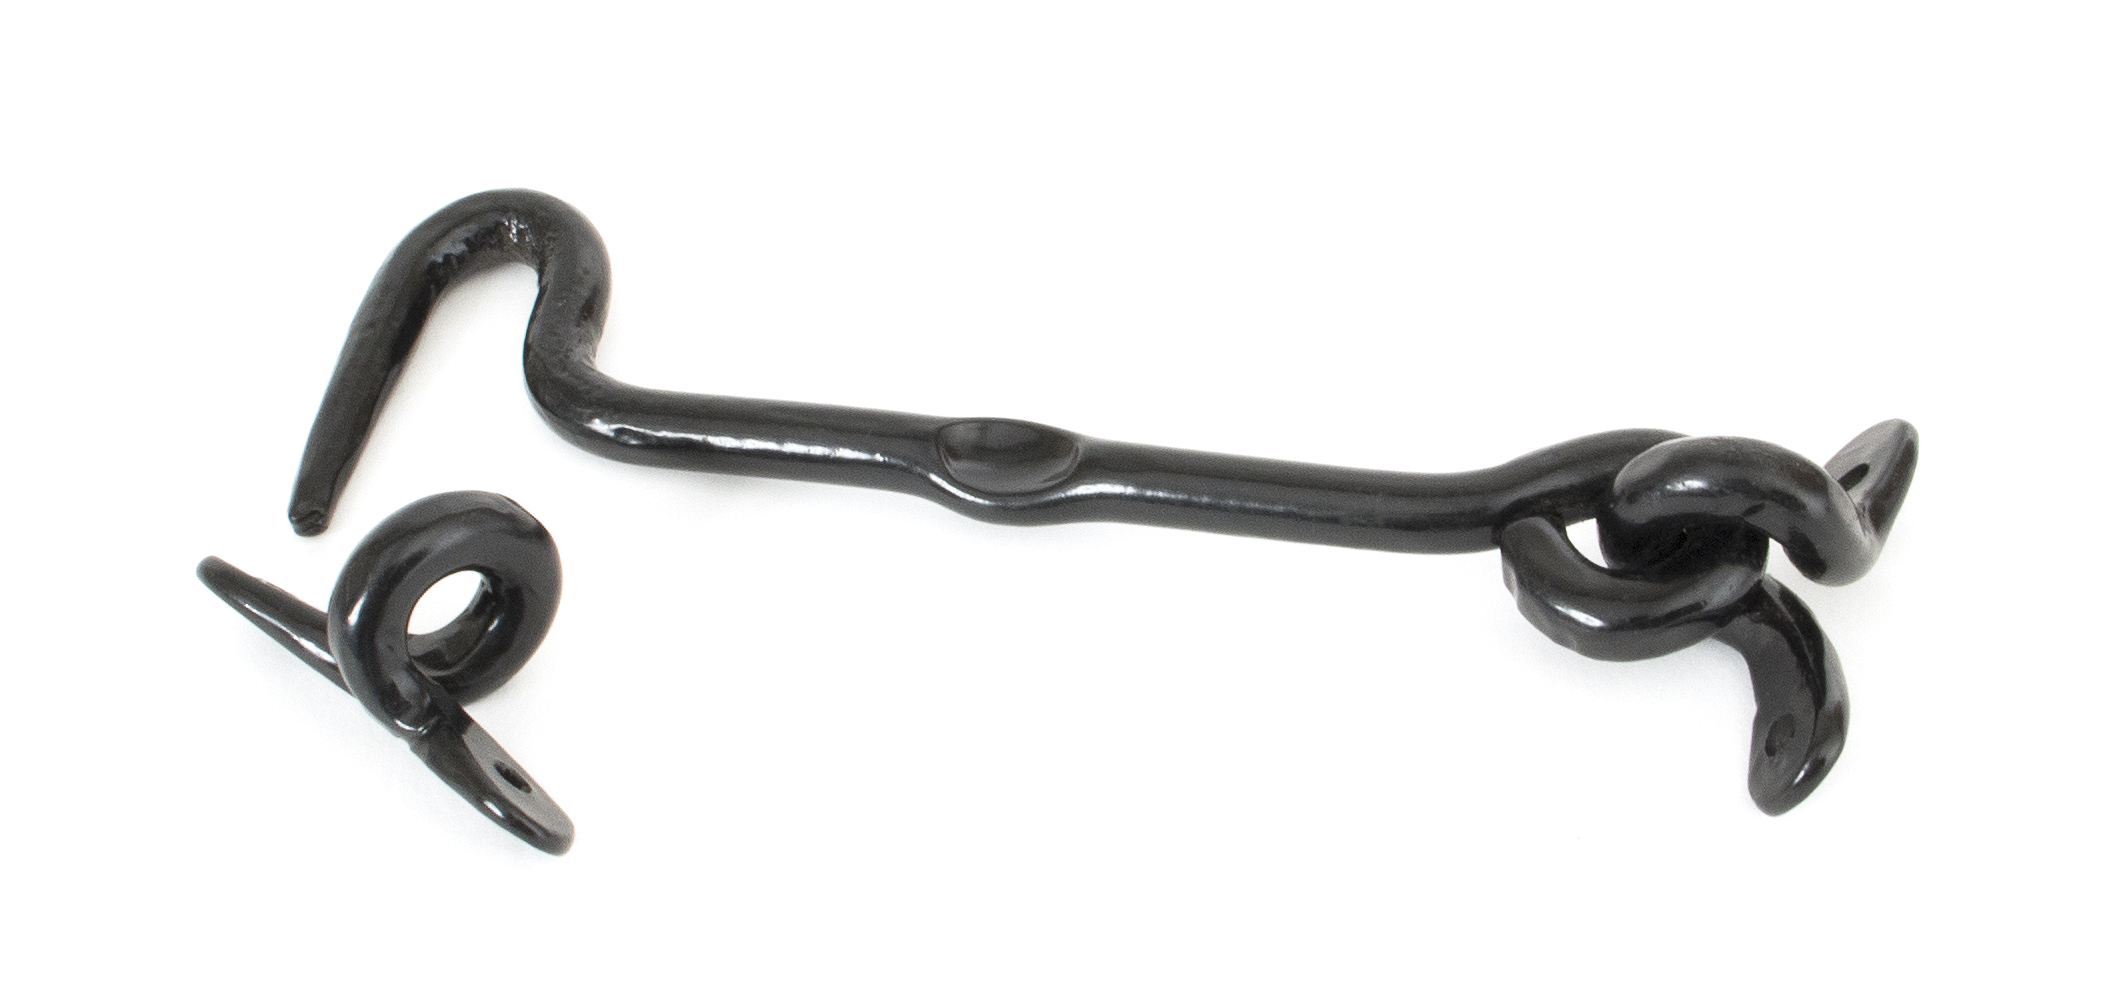 Forged Cabin Hook - 6"